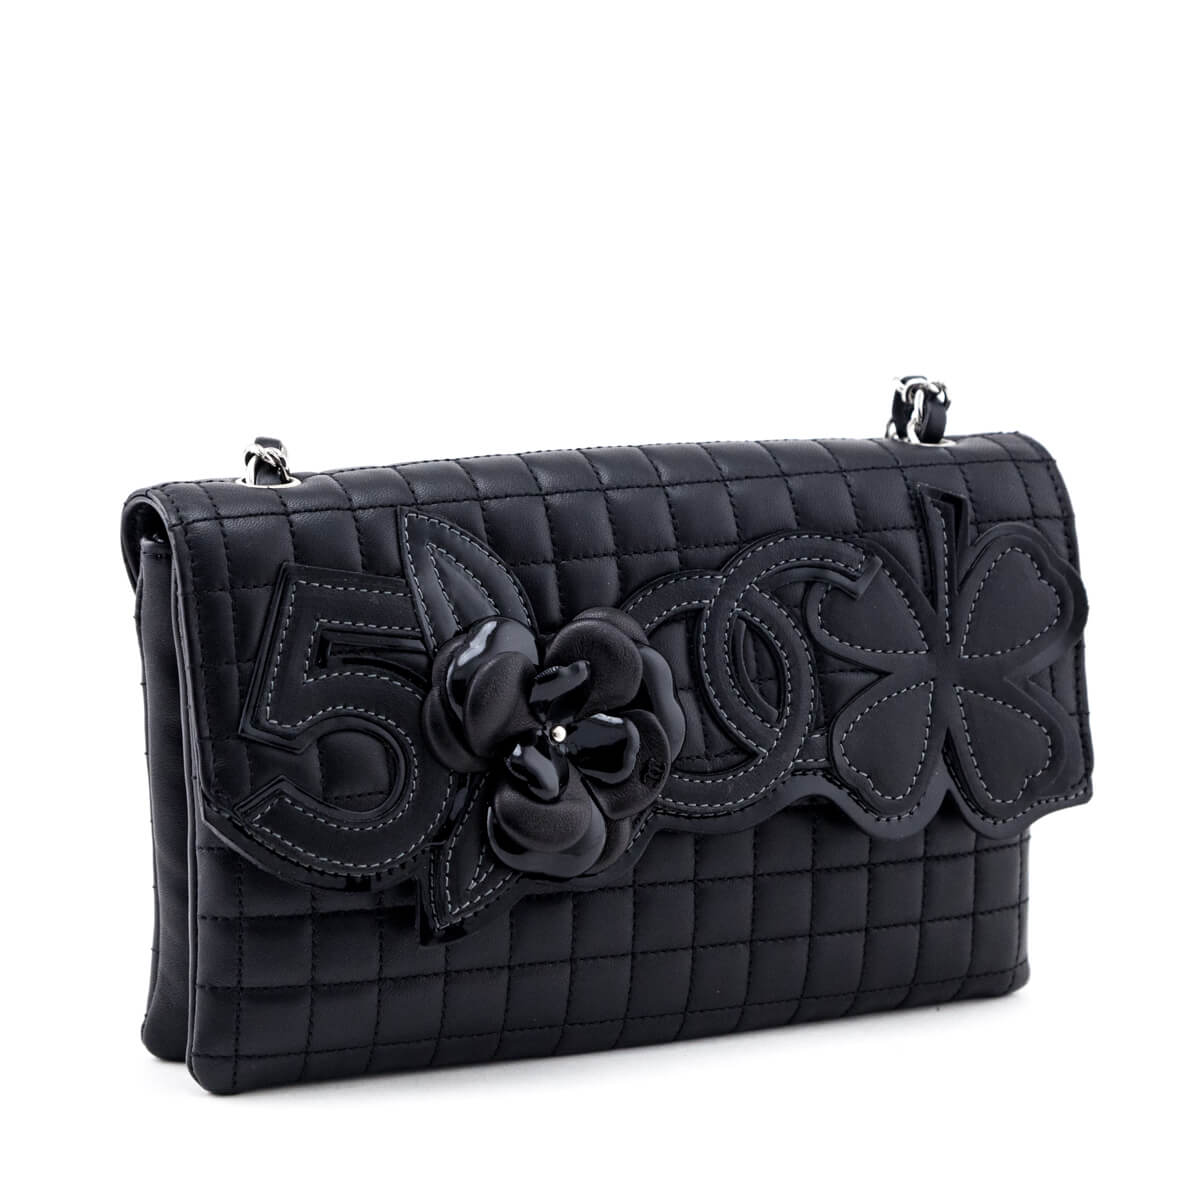 Chanel Black Quilted Lambskin Chocolate Bar Camellia No. 5 Pochette - Love that Bag etc - Preowned Authentic Designer Handbags & Preloved Fashions